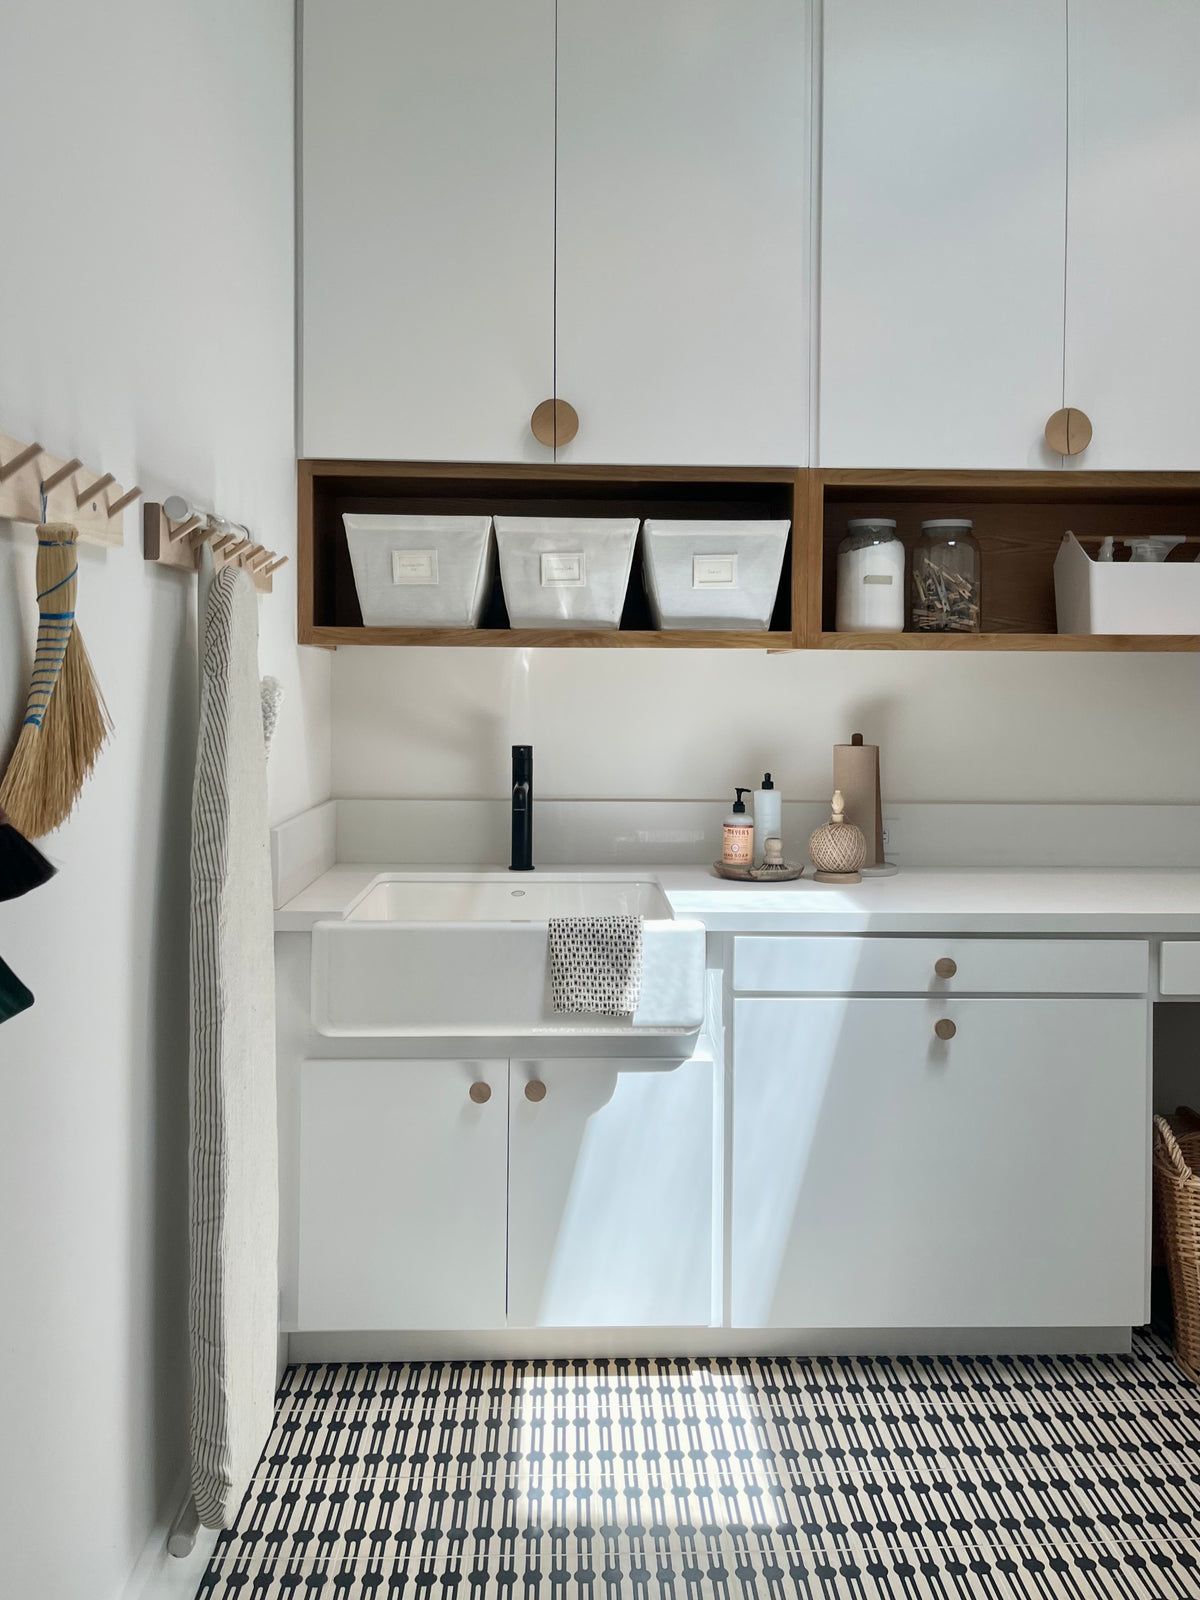 A laundry room with modern white cabinets, apron front sink and a patterned black and white tile floor.